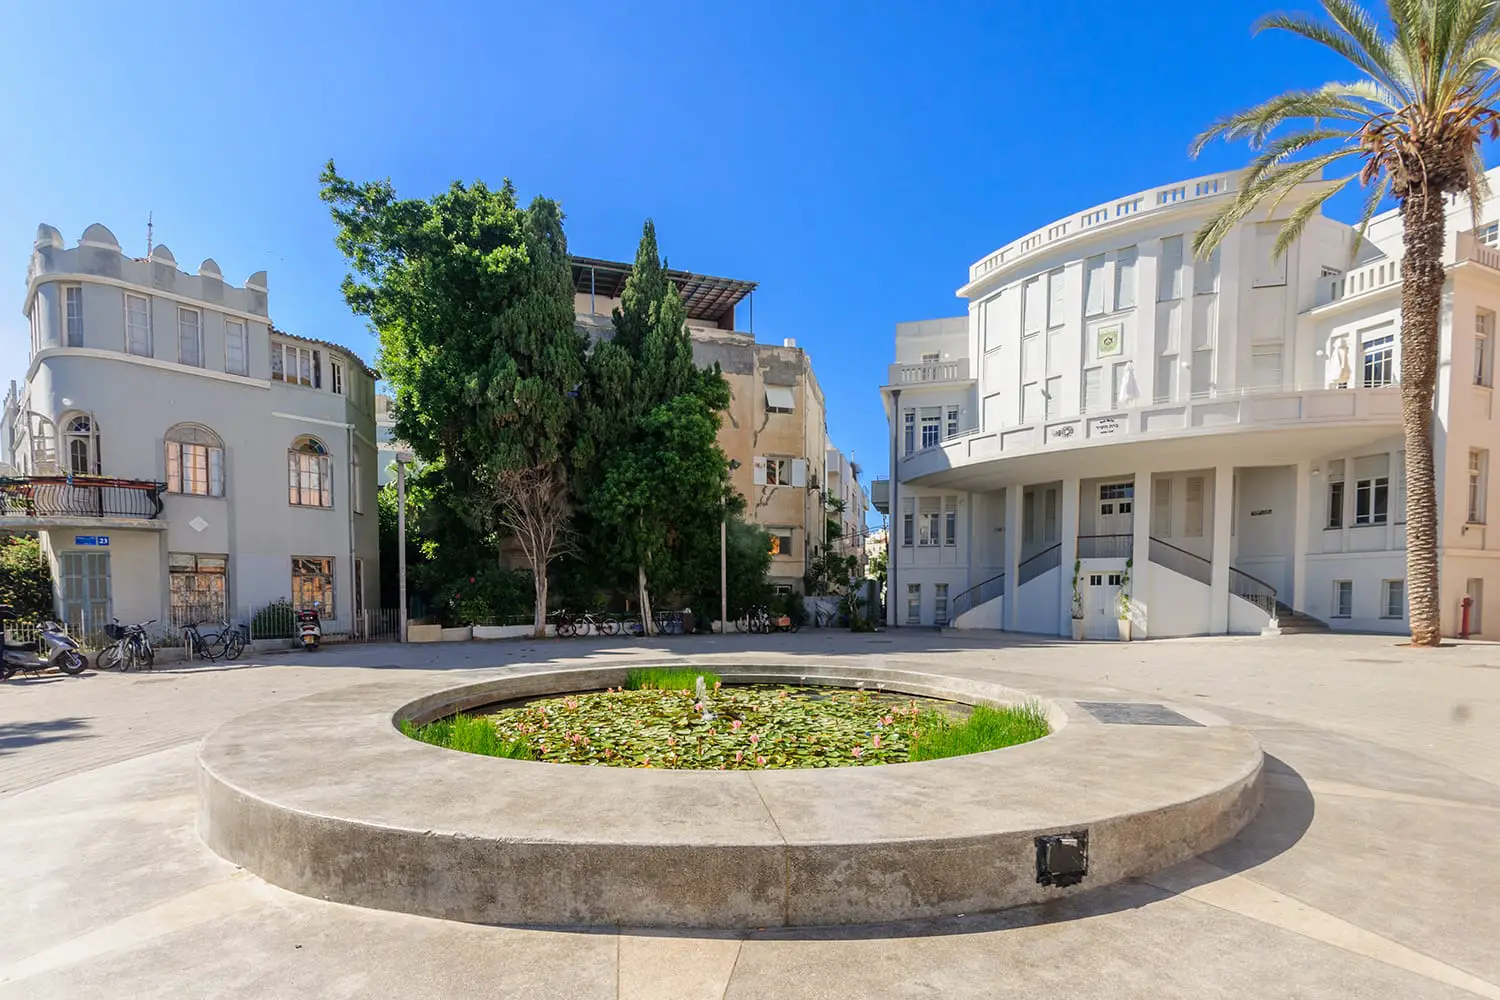 Scene of the Bialik Square, with visitors, in Tel Aviv, Israel. The Bialik Square was the home for the first townhall of Tel-Aviv and is an example of the Bauhaus architecture